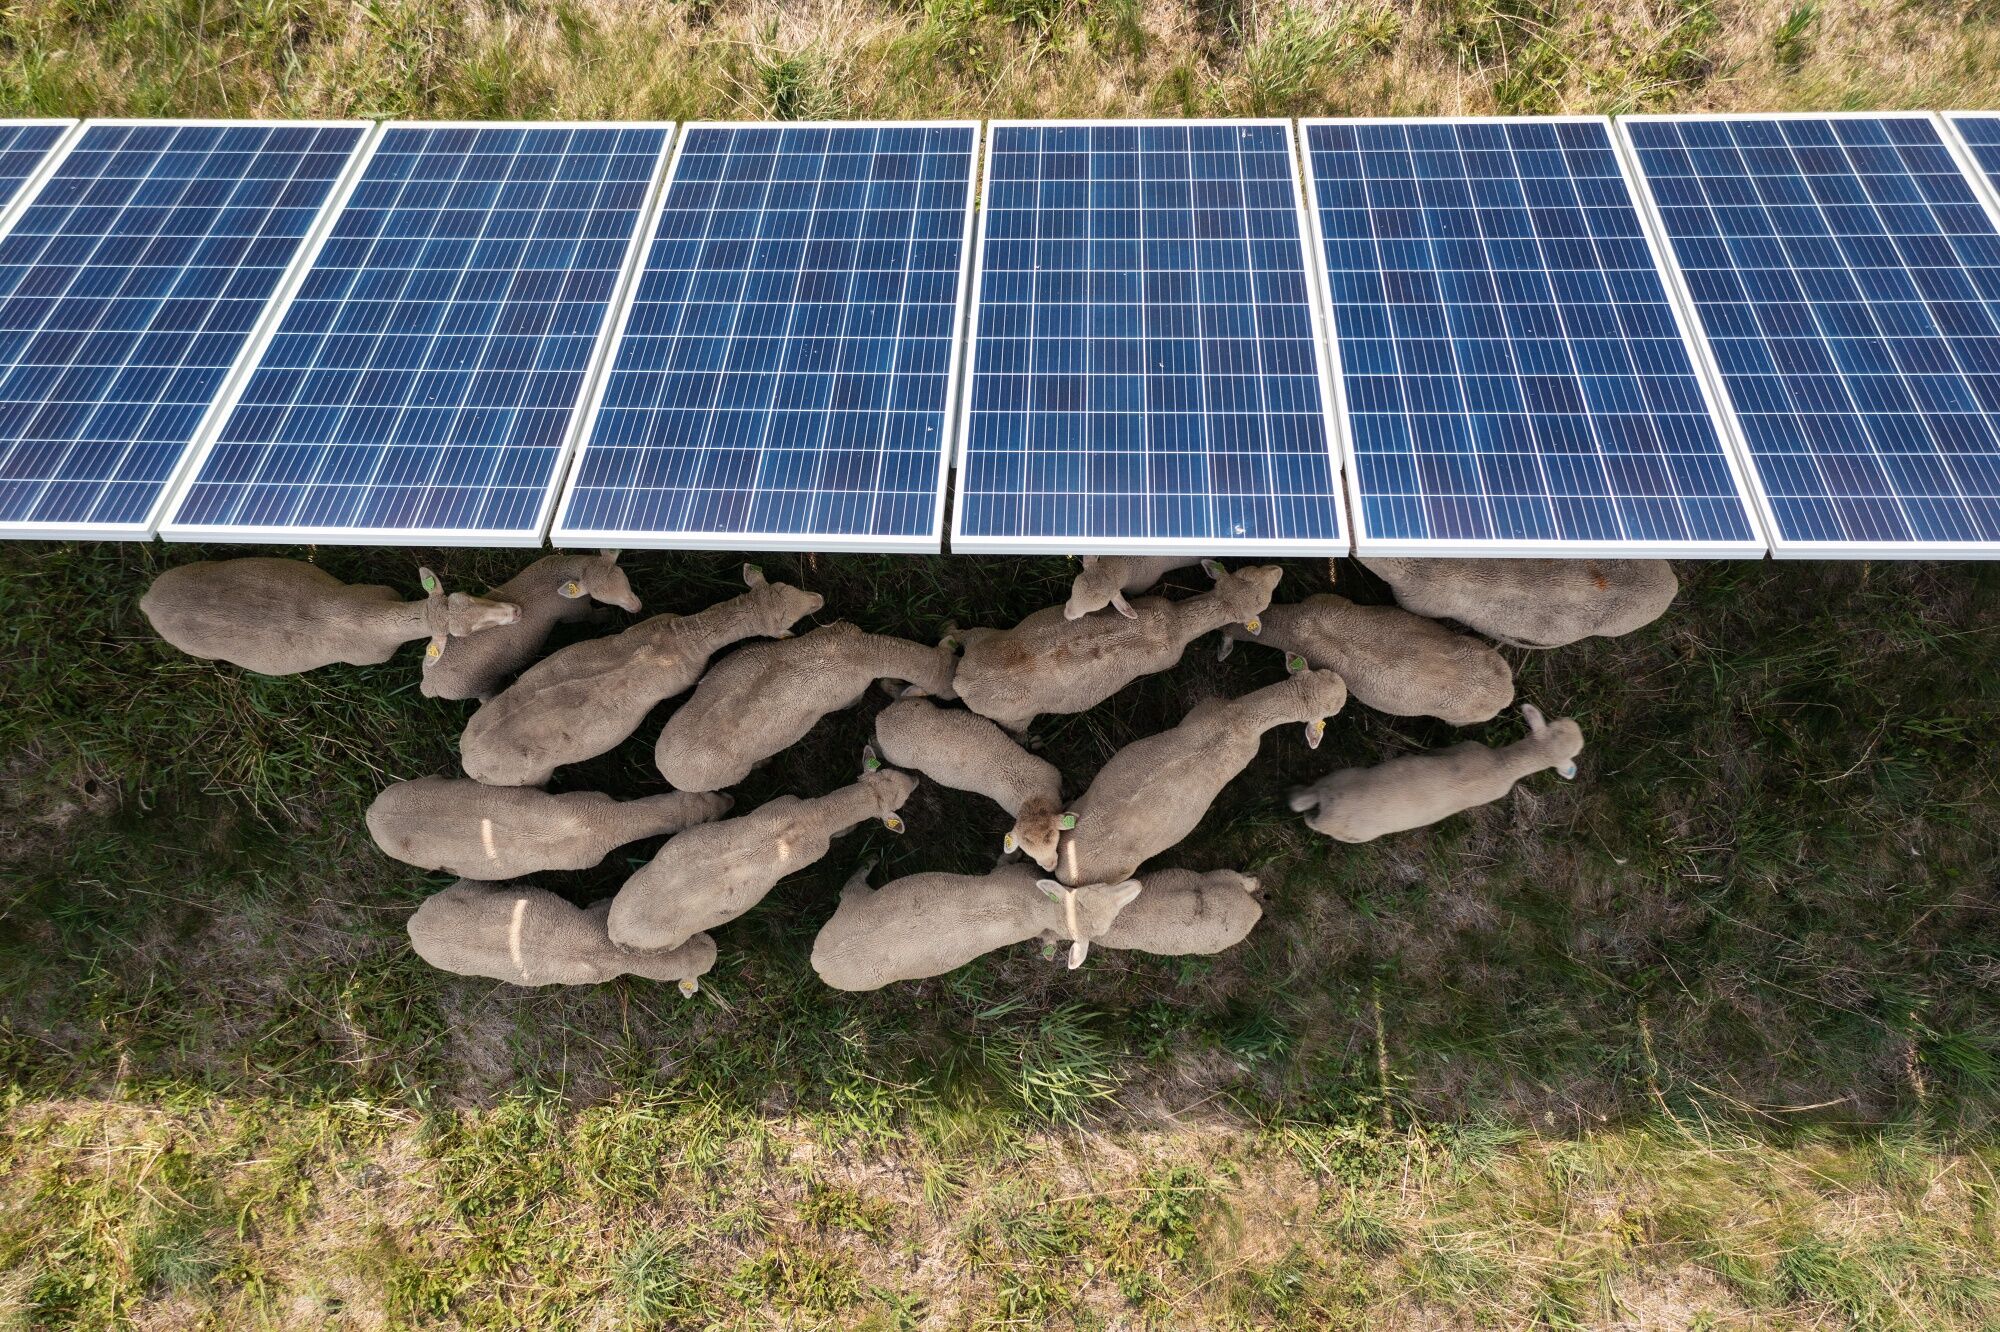 Landscape to Lambscape: How Sheep are Reshaping Solar Farm Maintenance